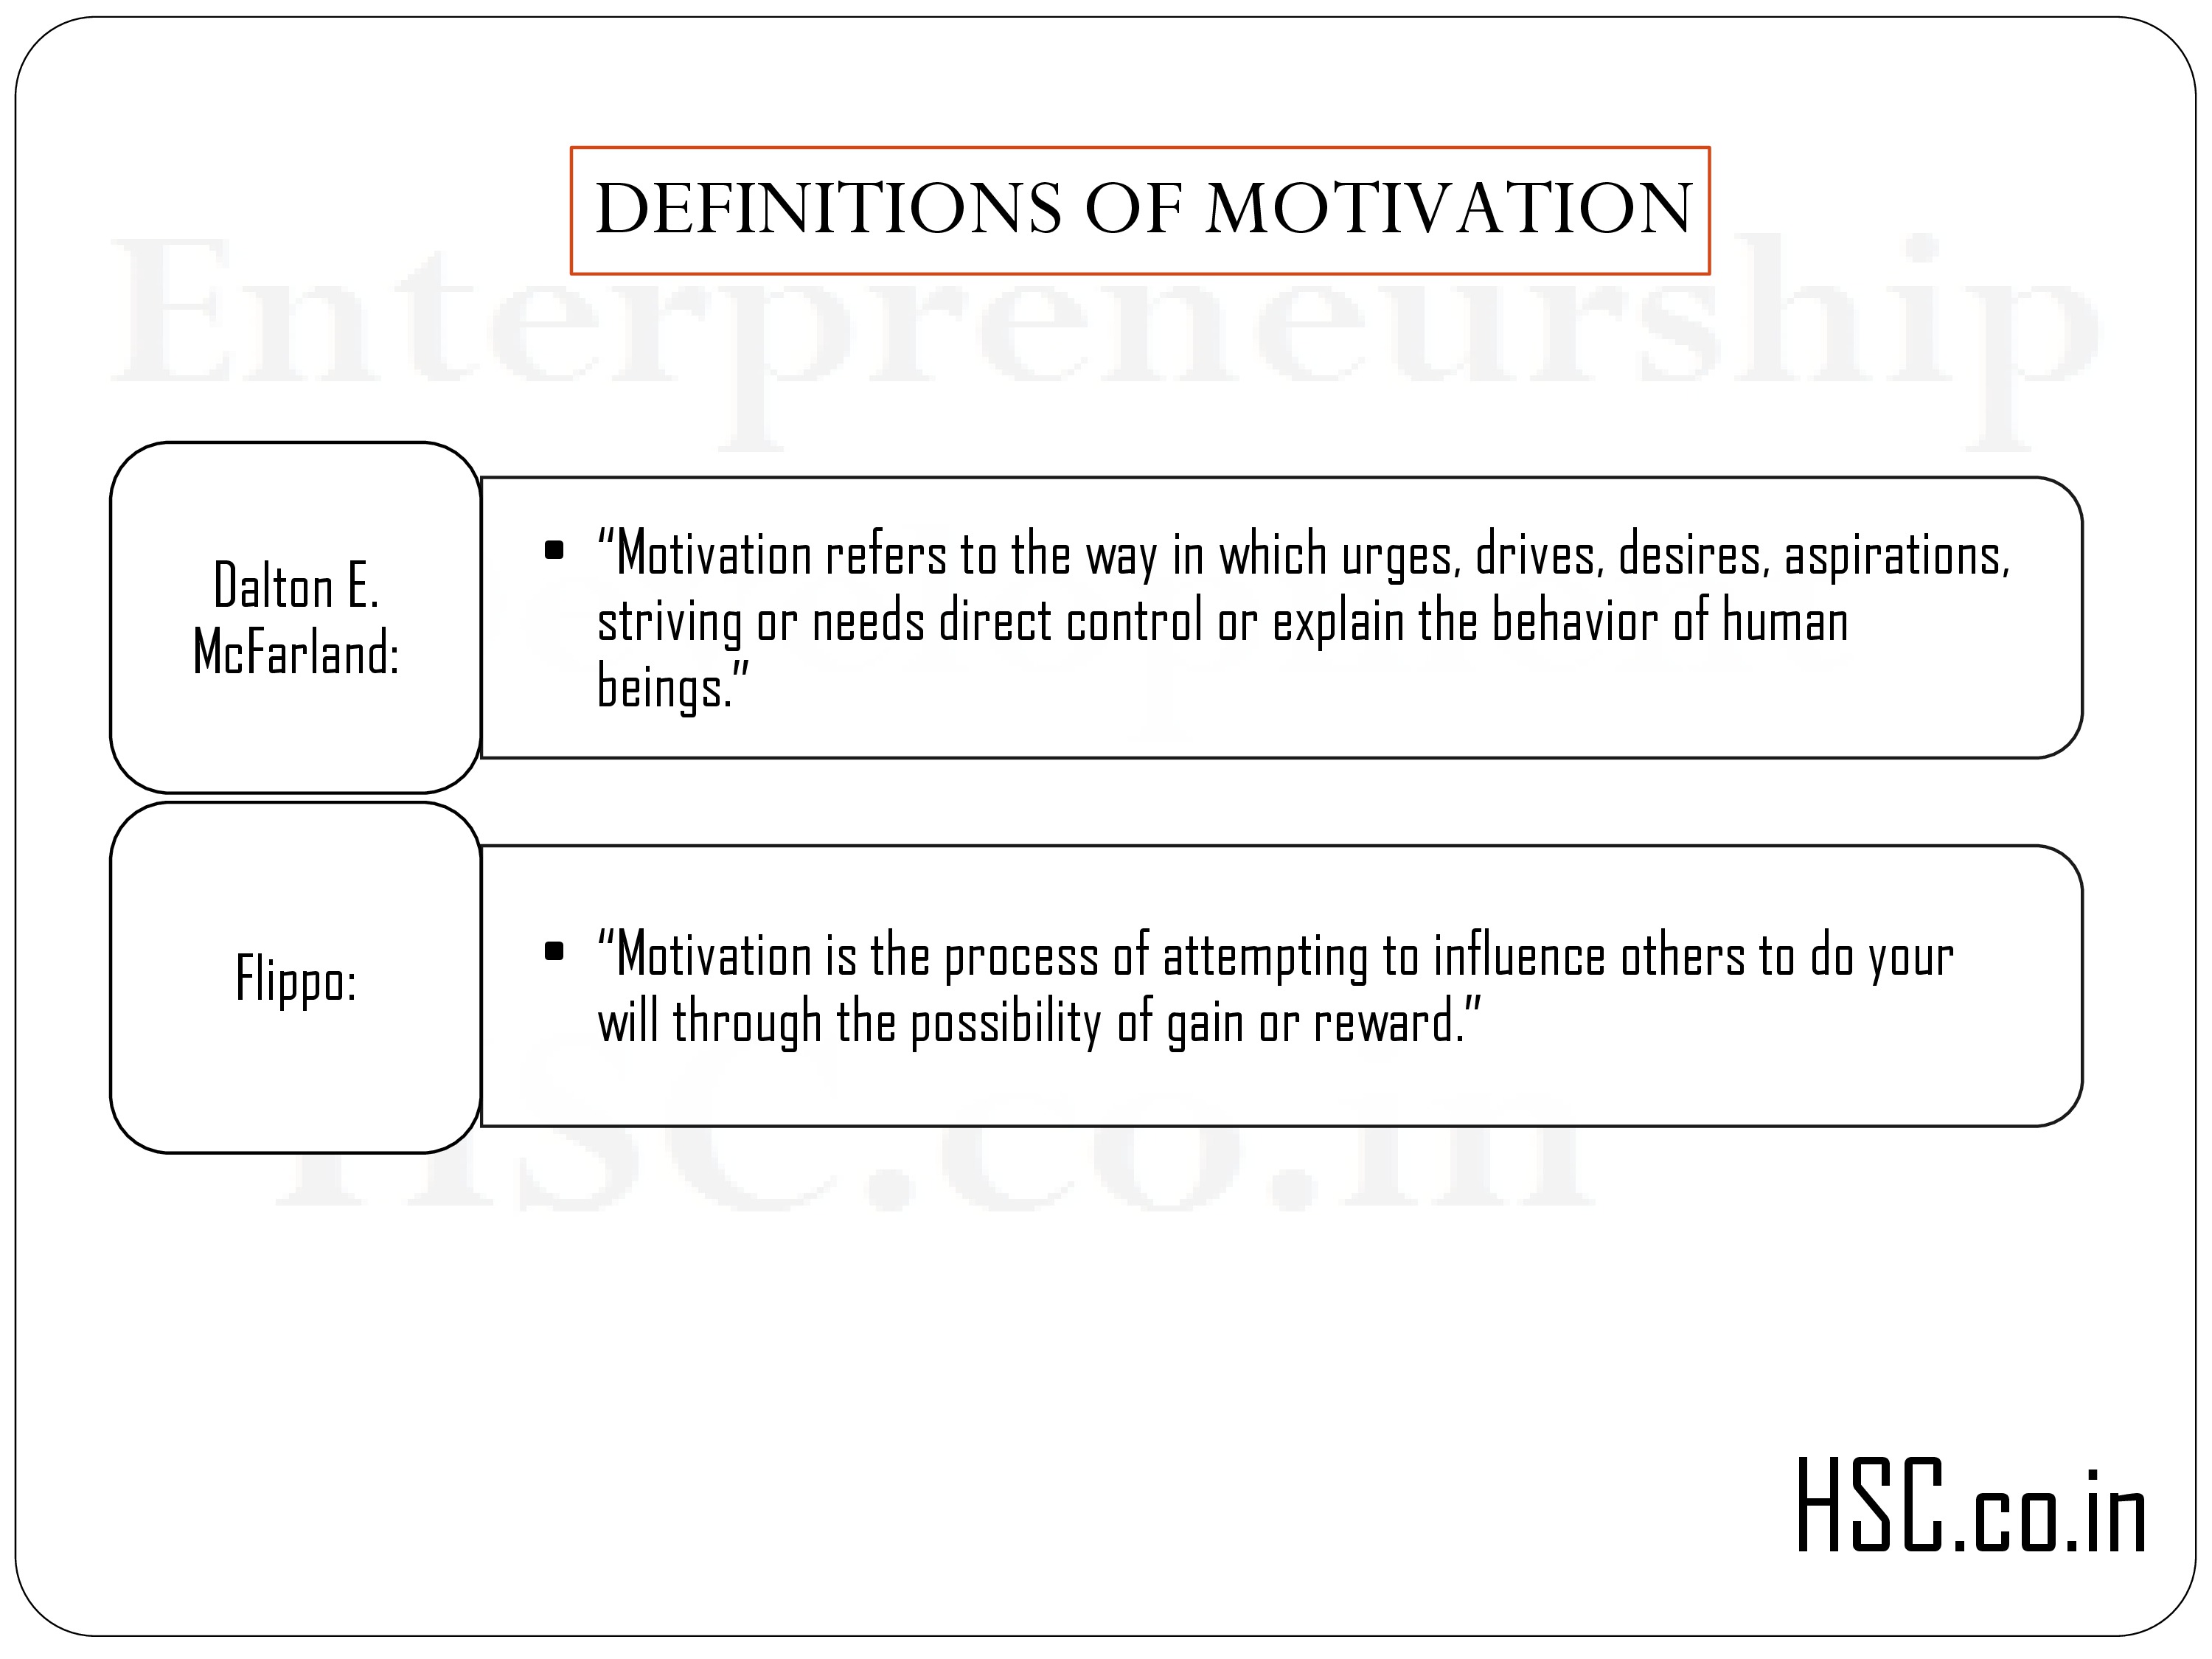 DEFINITIONS OF MOTIVATION